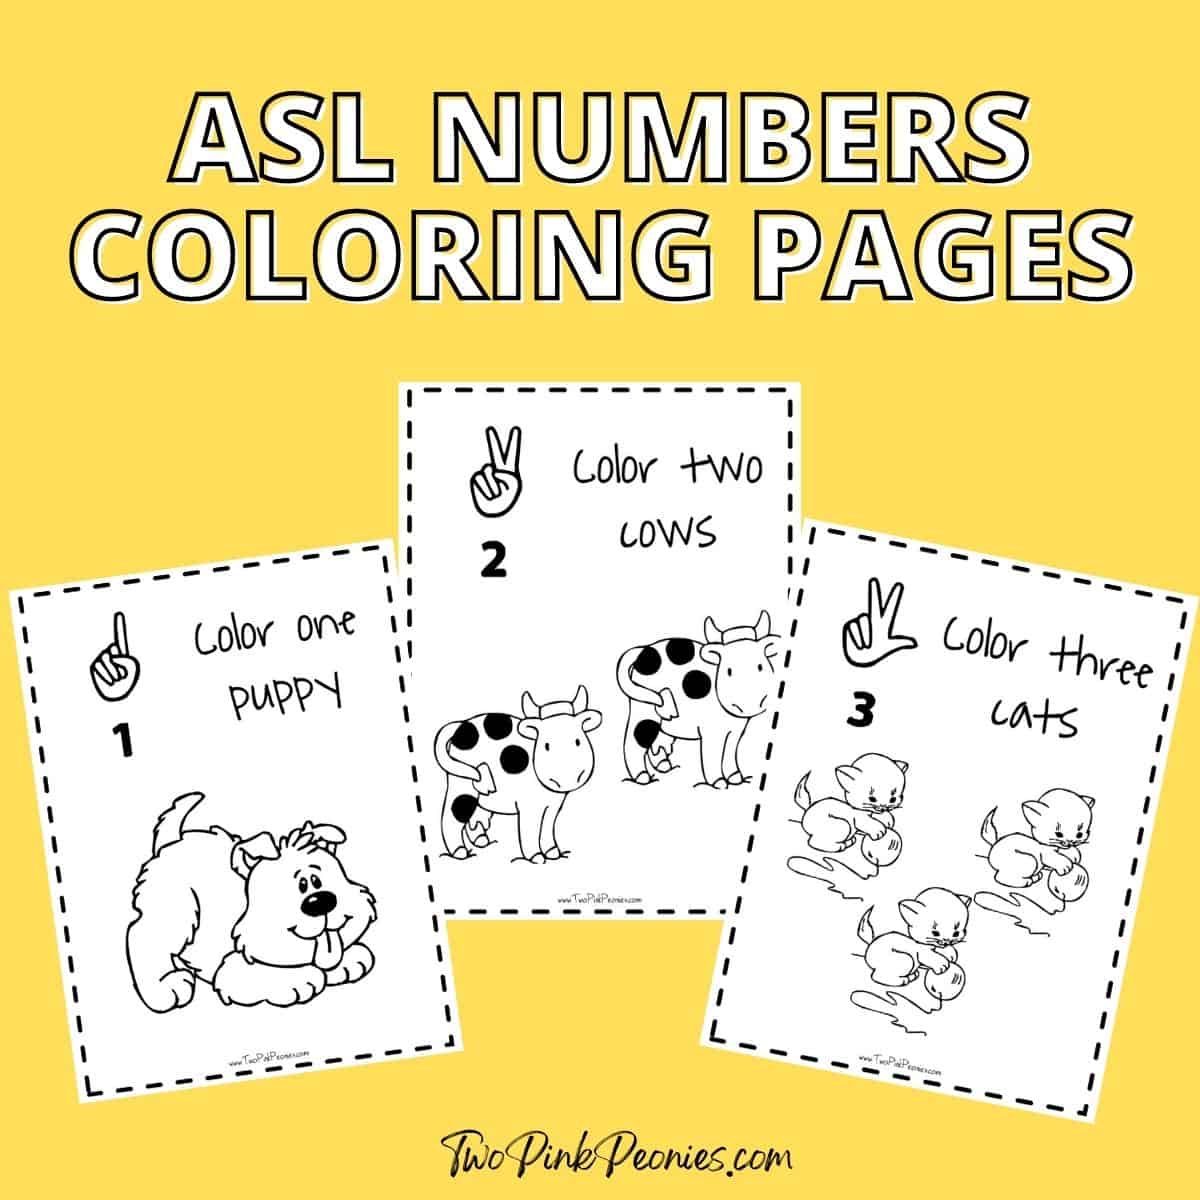 ASL NUMBERS COLORING PAGES